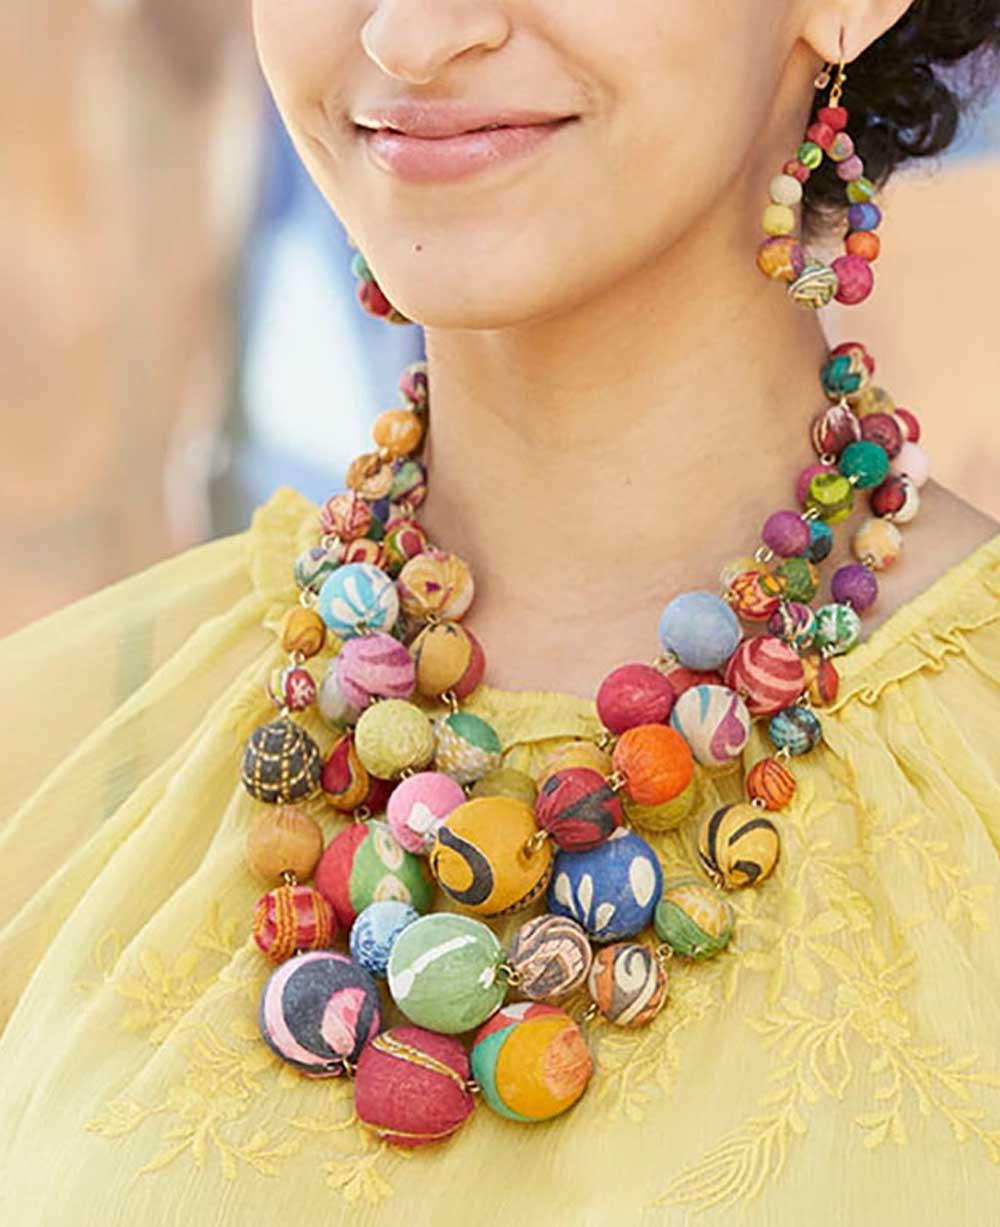 Woman wearing the Kantha bead necklace, complementing her bohemian attire